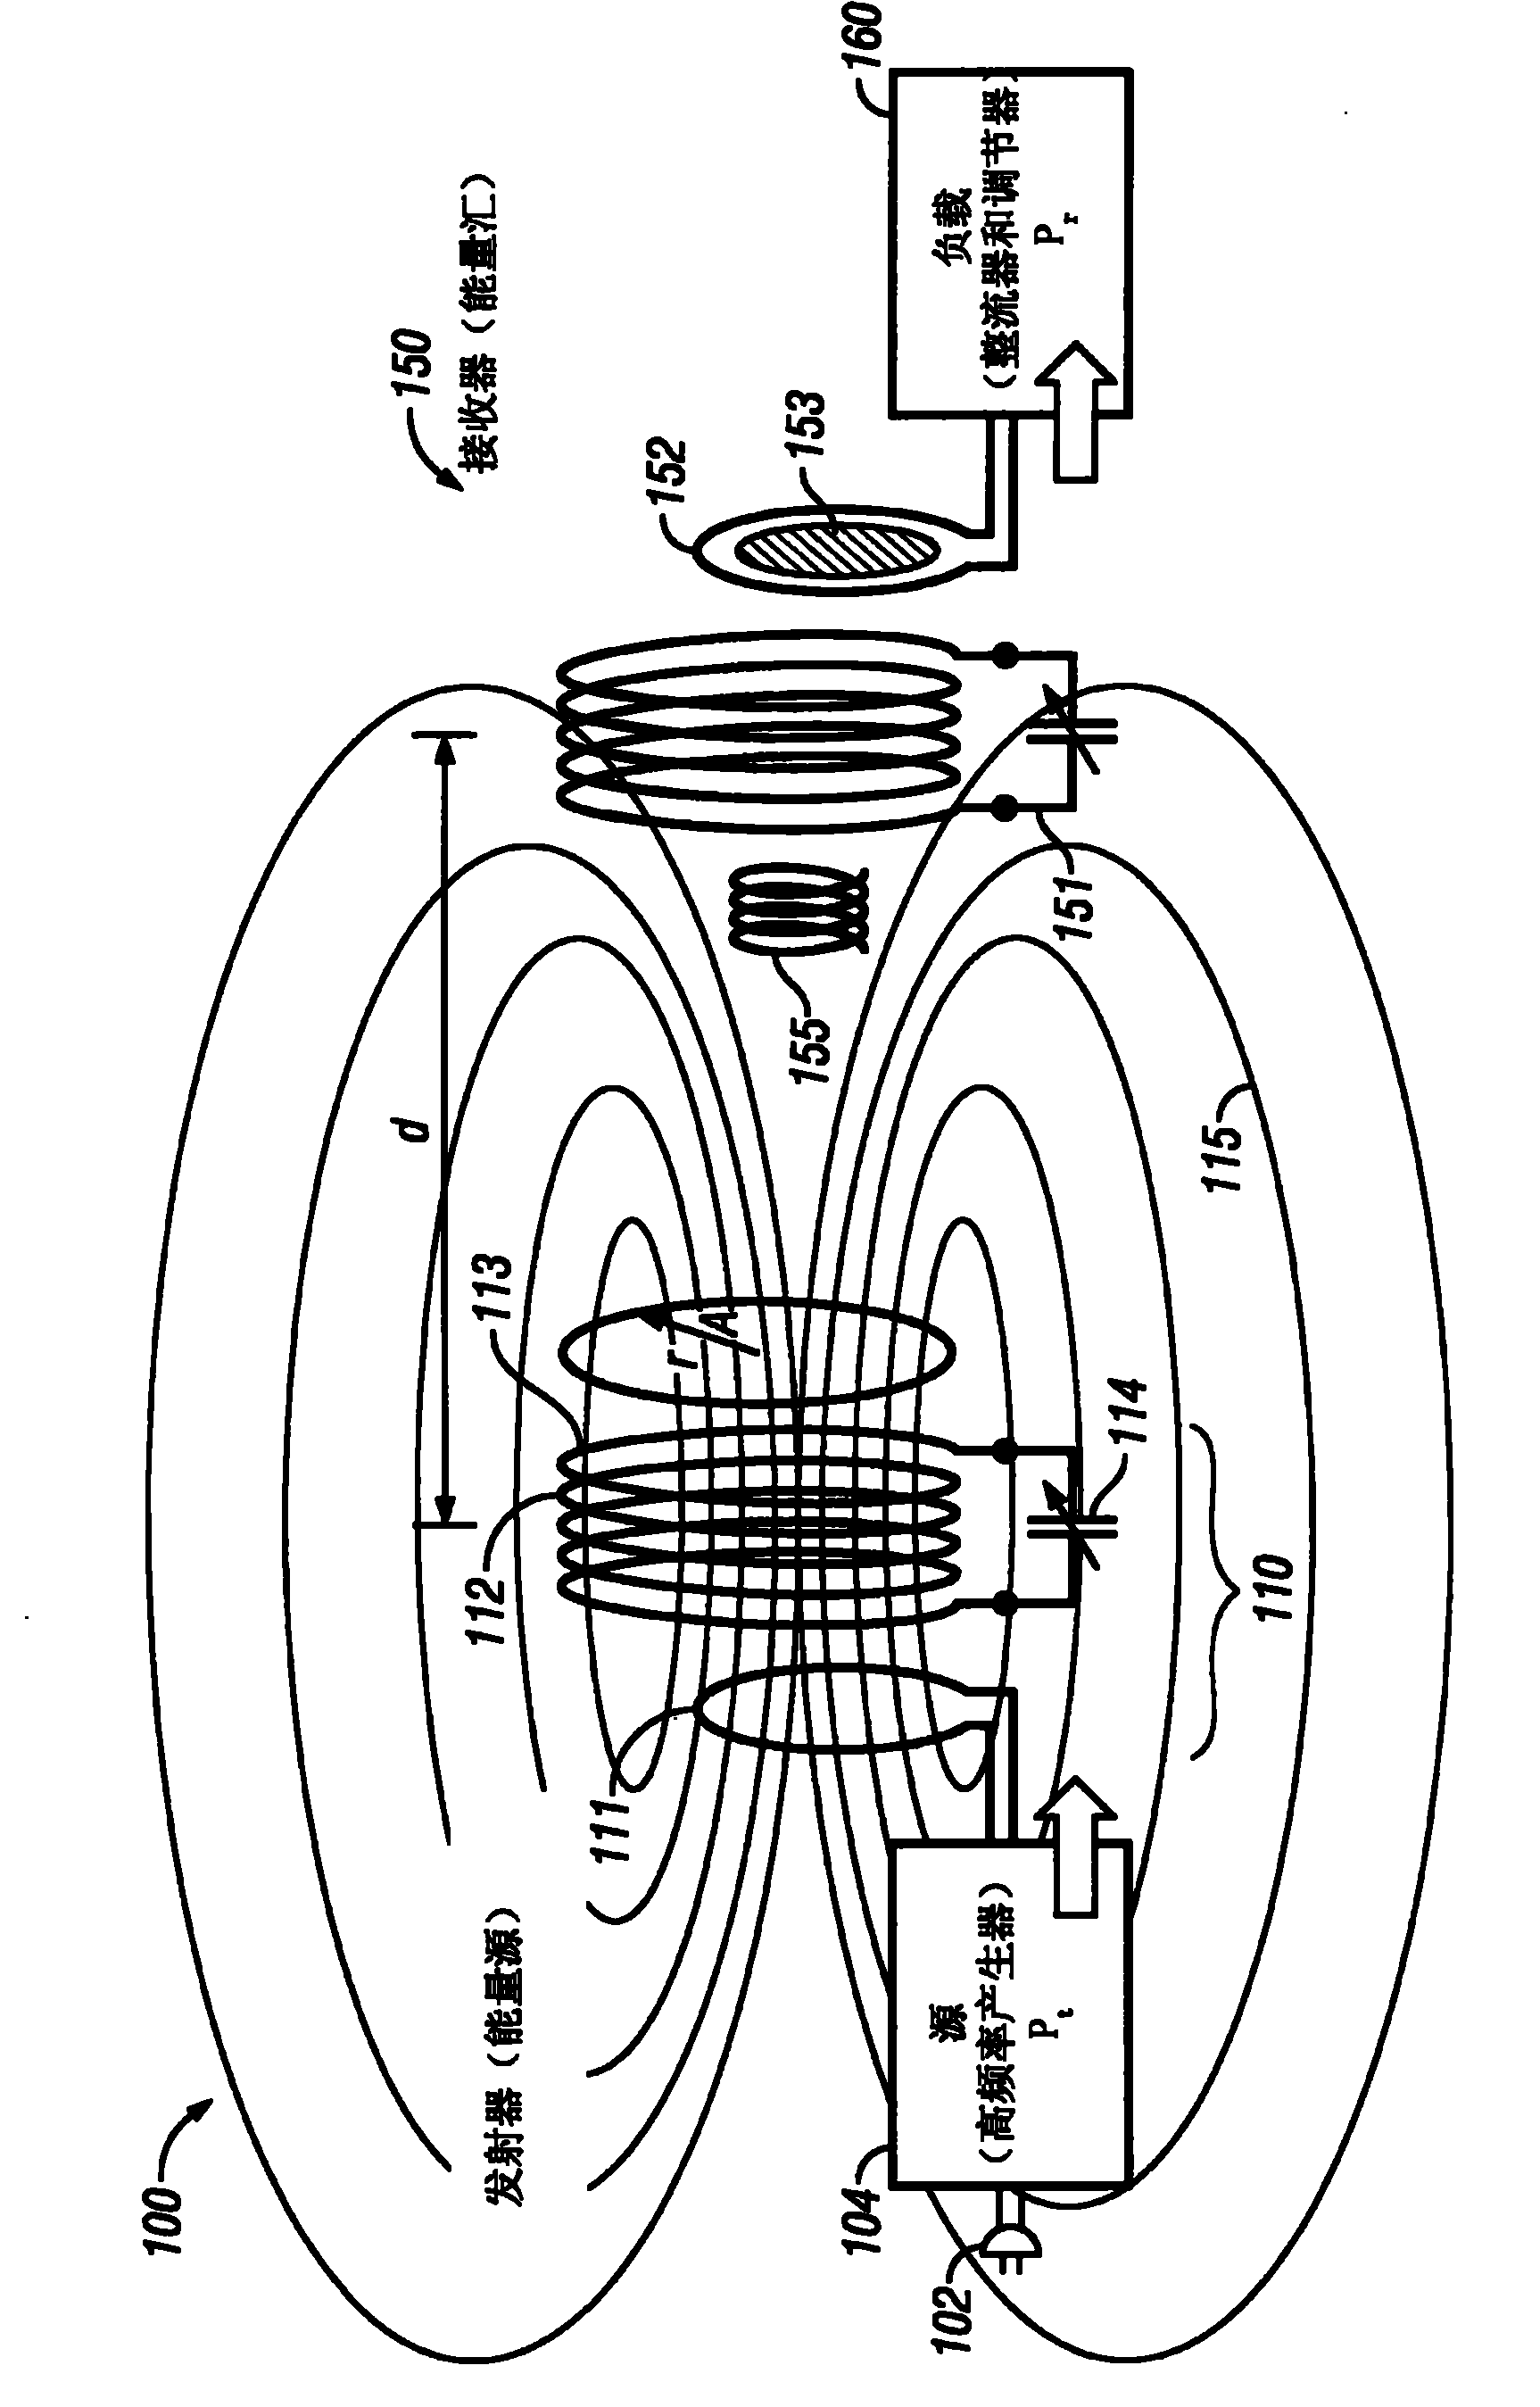 Long range low frequency resonator and materials